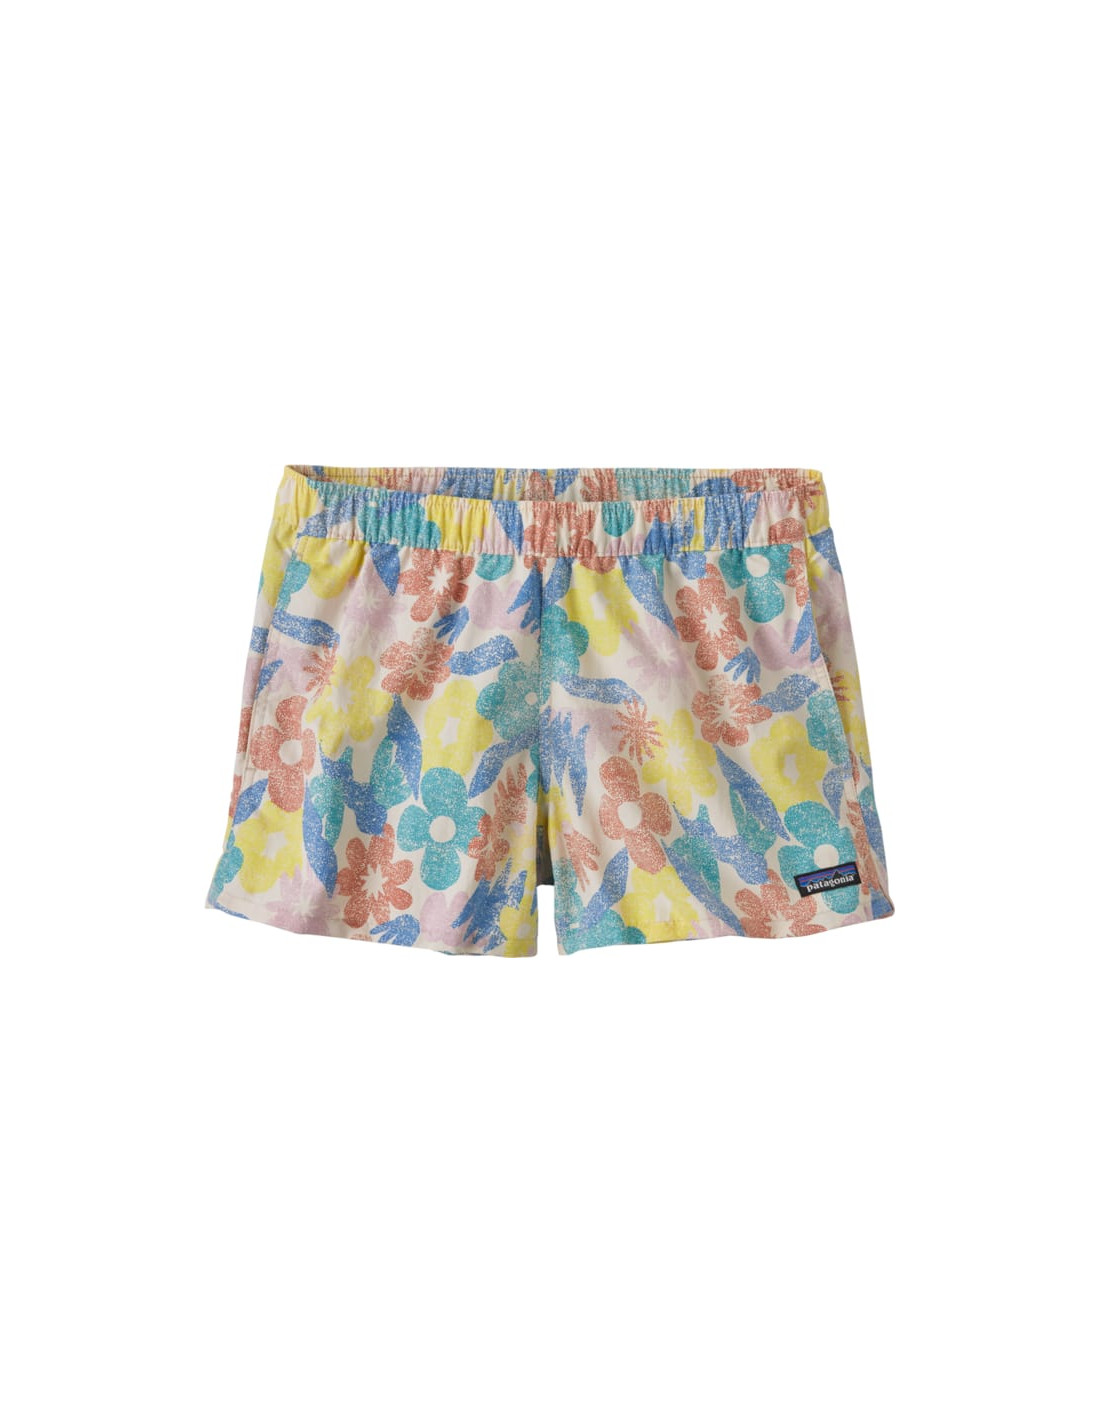 W'S BARELY BAGGIES SHORTS - 2 12 IN.